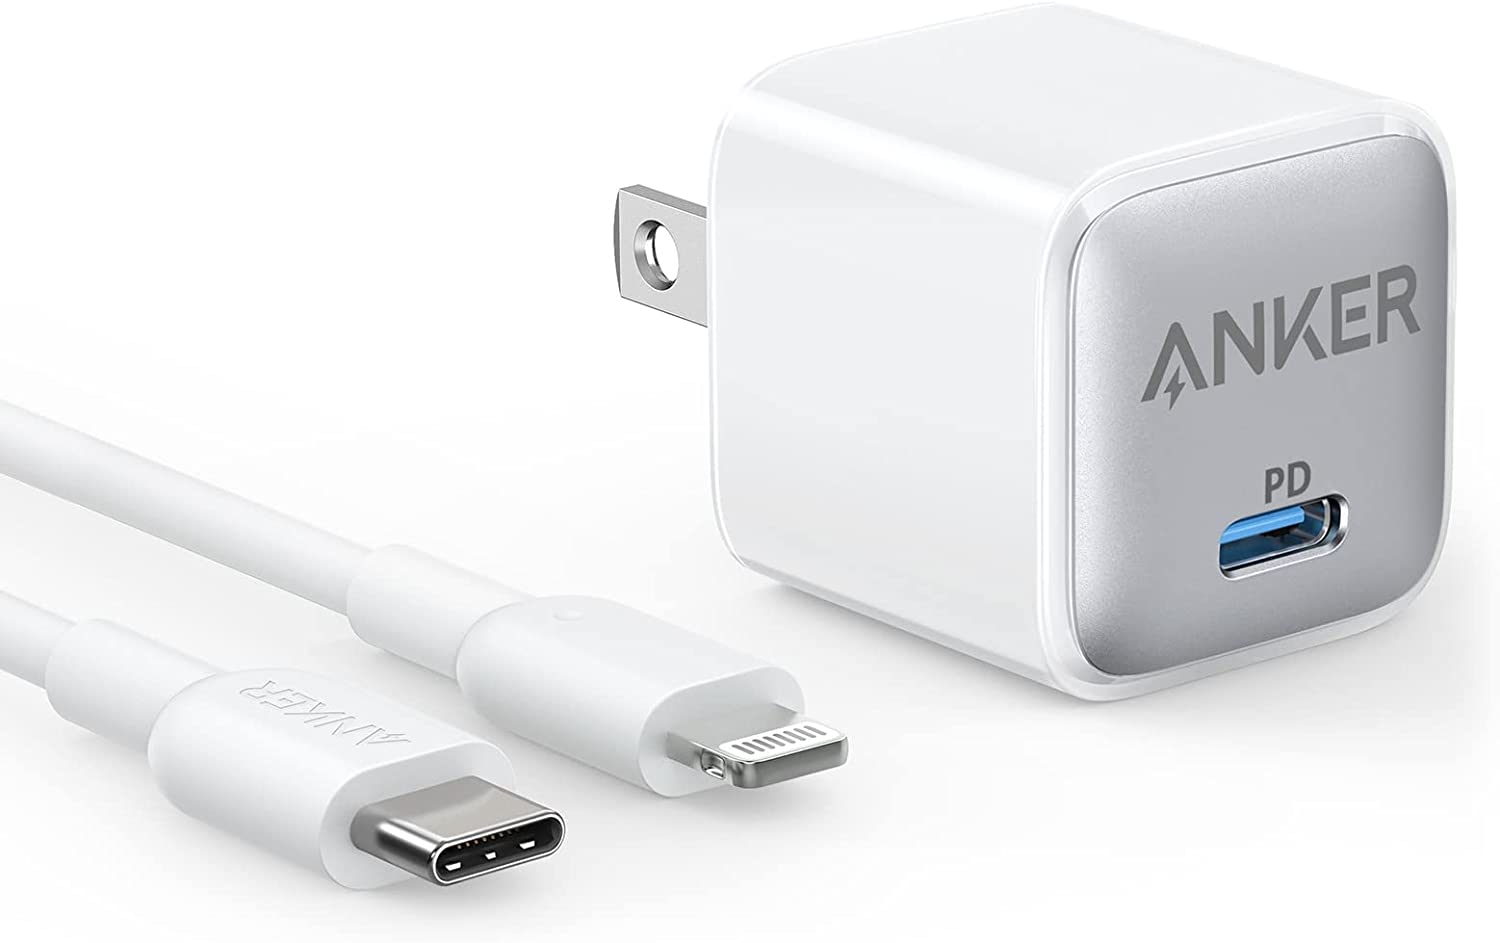 Anker charging accessories are up to 37 percent off in a one-day Amazon sale